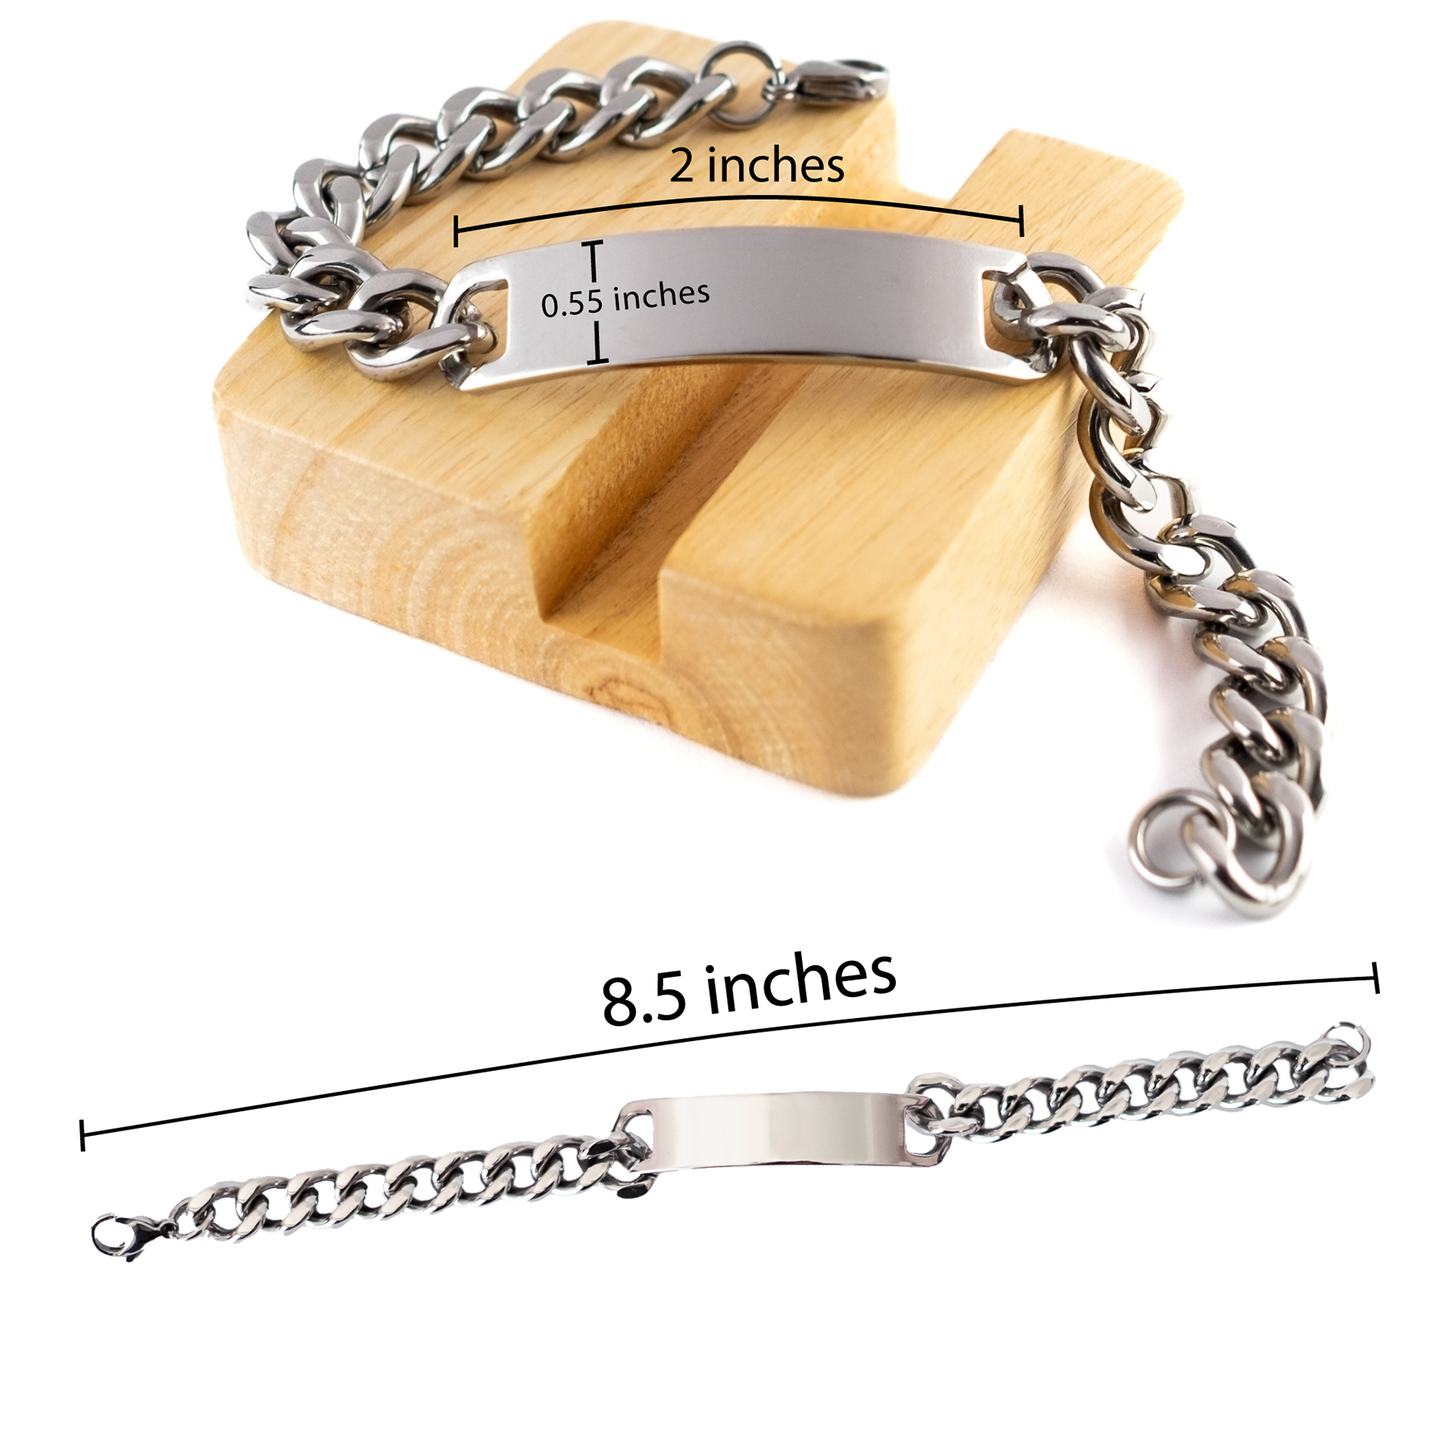 To My Second Mom Thank You Gifts, You are appreciated more than you know, Appreciation Cuban Chain Stainless Steel Bracelet for Second Mom, Birthday Unique Gifts for Second Mom